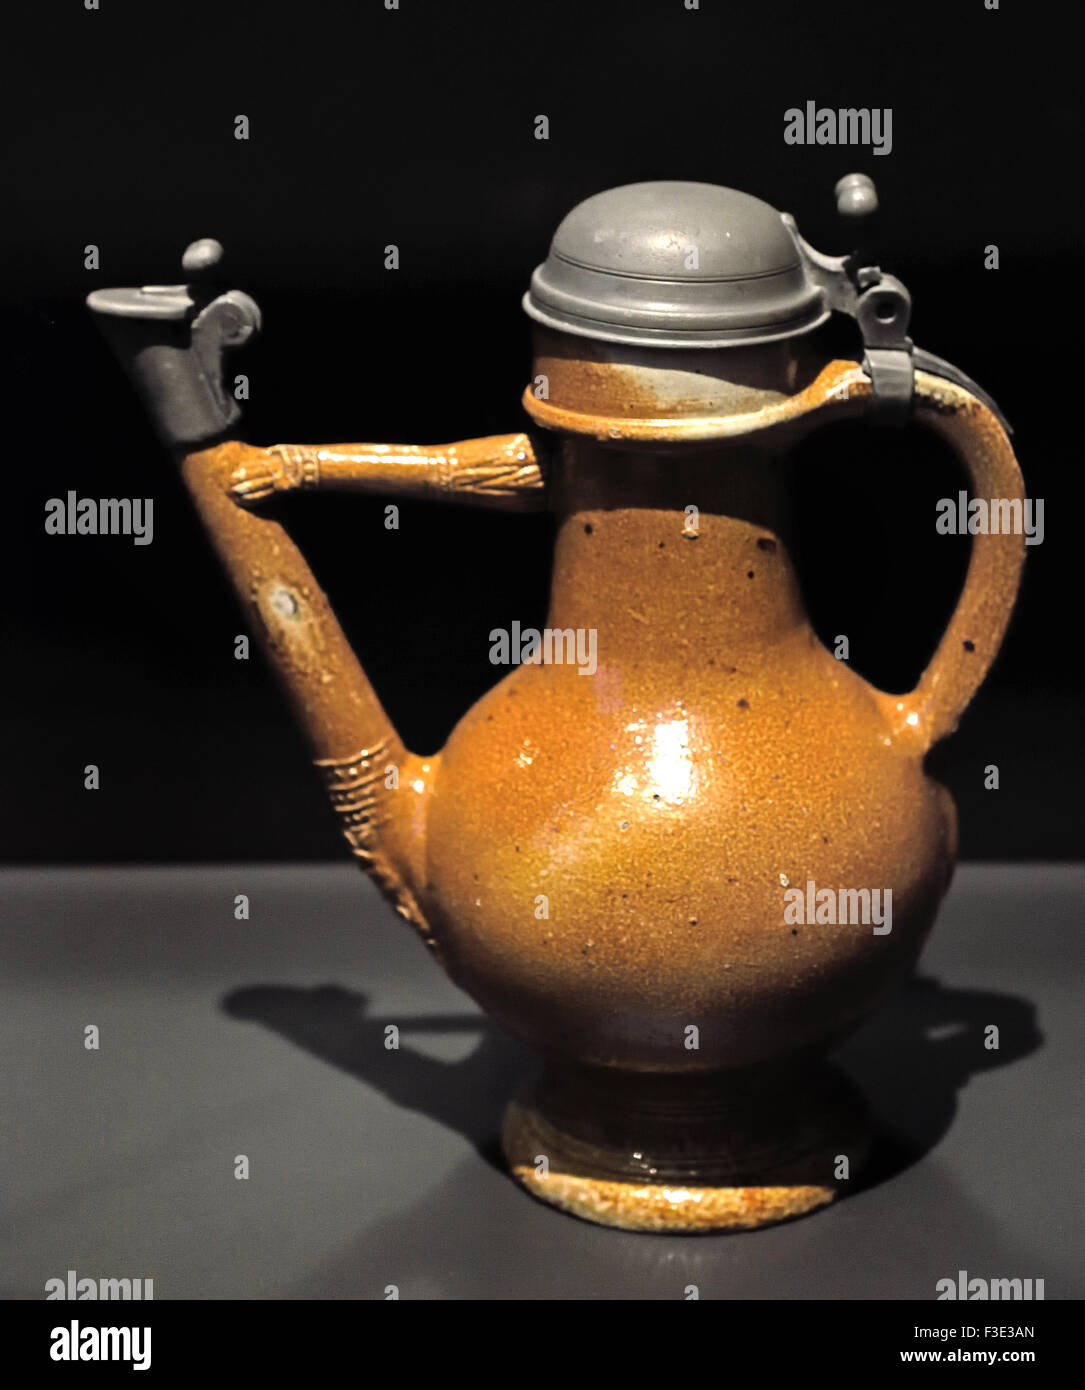 Spouted Jug Raeren 1580 German Germany ( Spout is shaped like human arm ) Raeren is a municipality located in the Belgian province of Liège Stock Photo